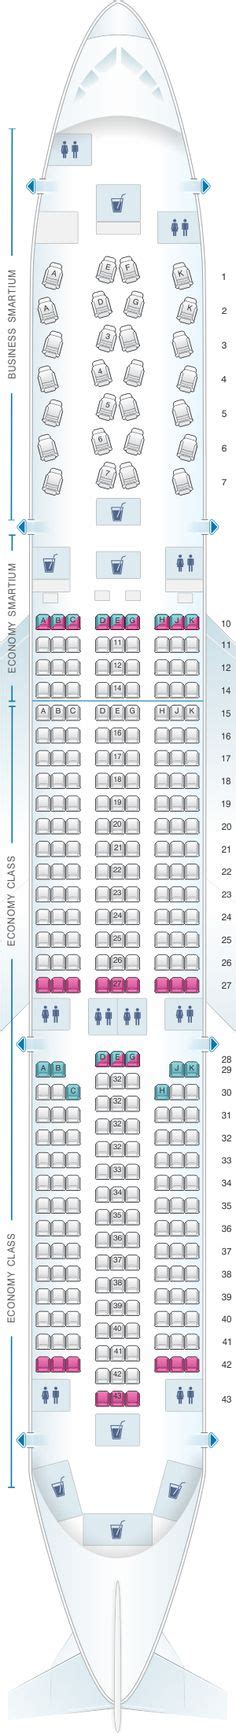 Seat Map Cathay Pacific Airways Airbus A350 900 35g Cathay Pacific